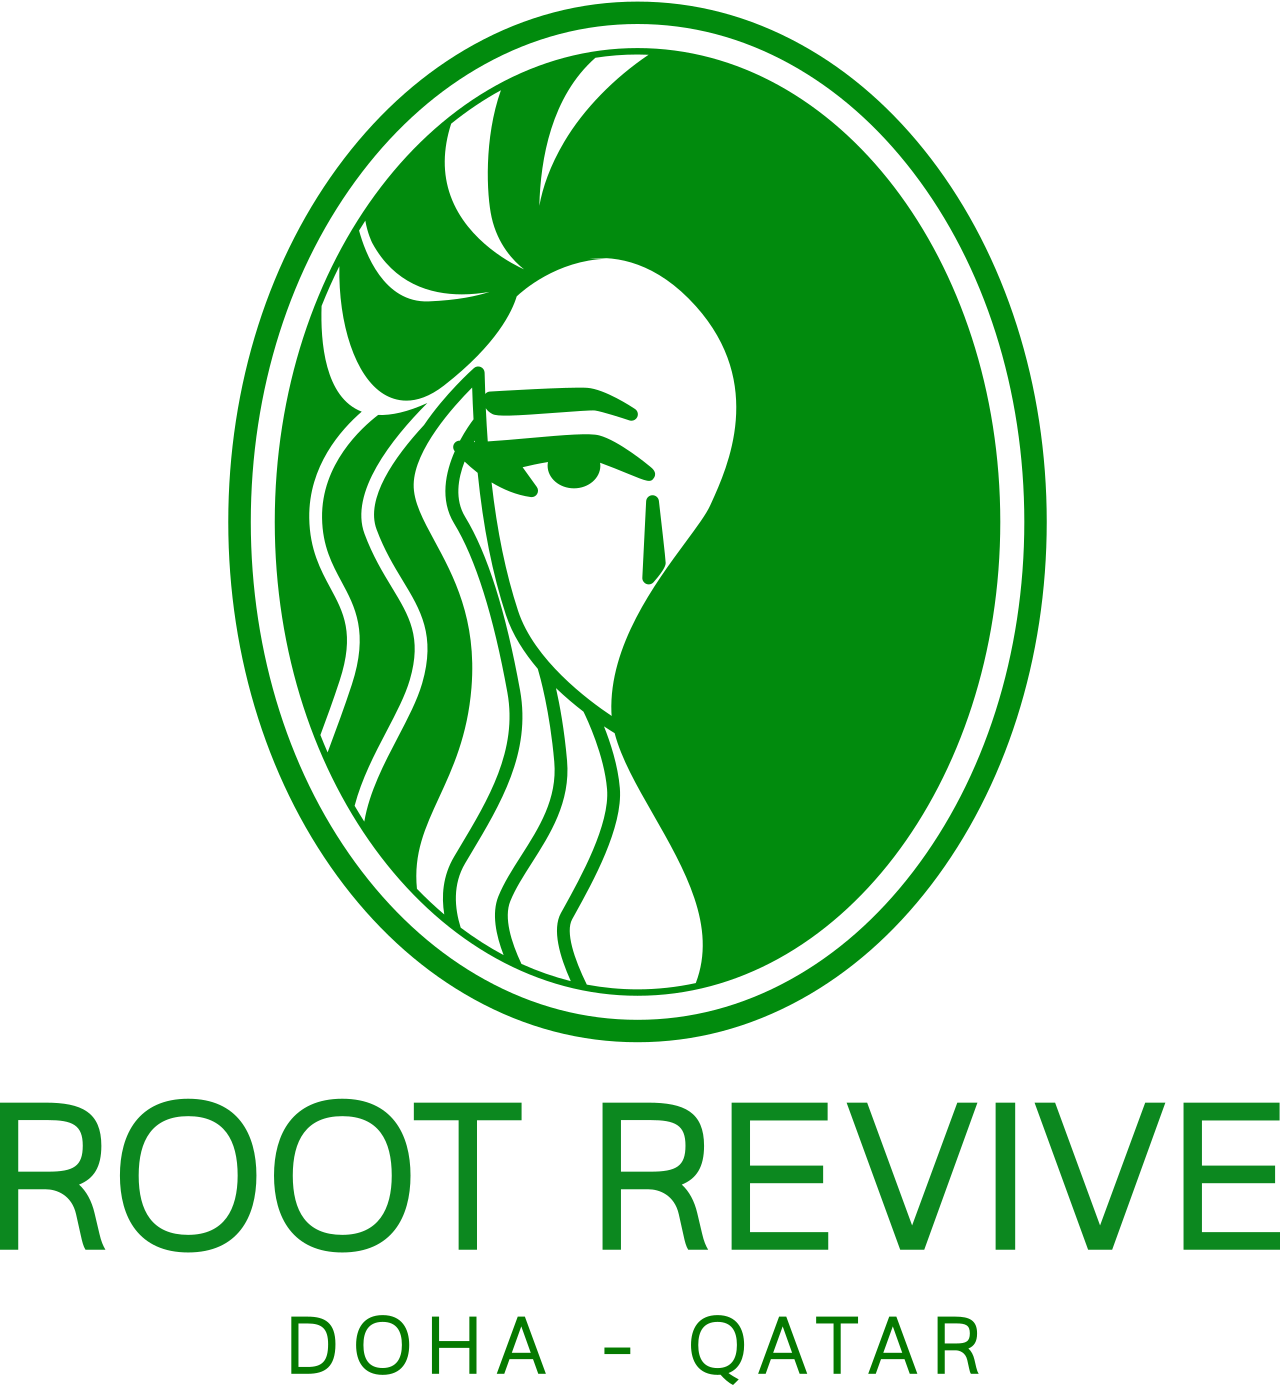 Root Revive's logo